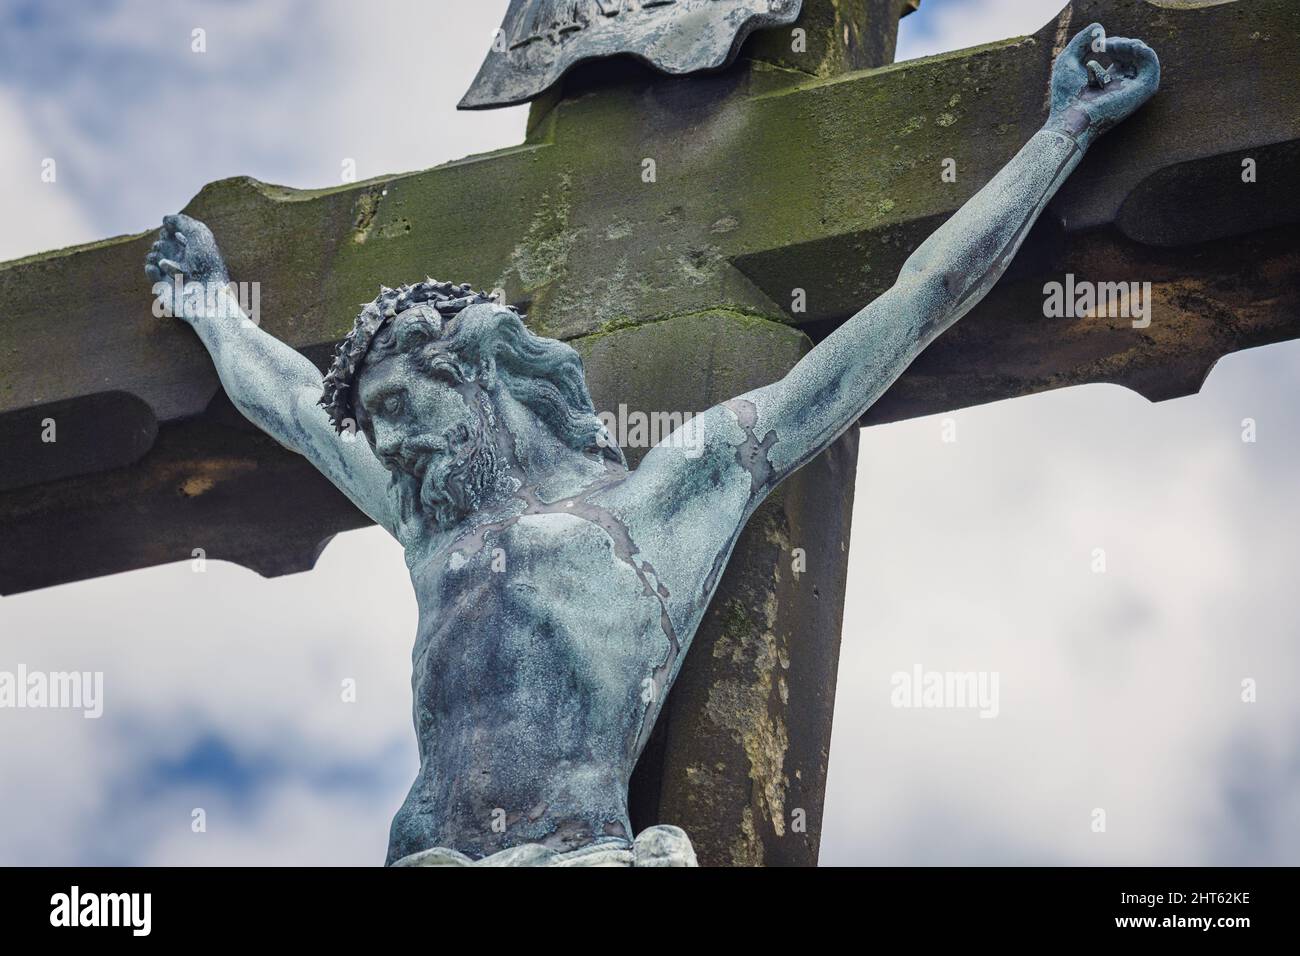 Cross with a crucified figure of Jesus Christ. Close up of Jesus Christ against the background of blue sky. Old, stone cross in the summer. Stock Photo